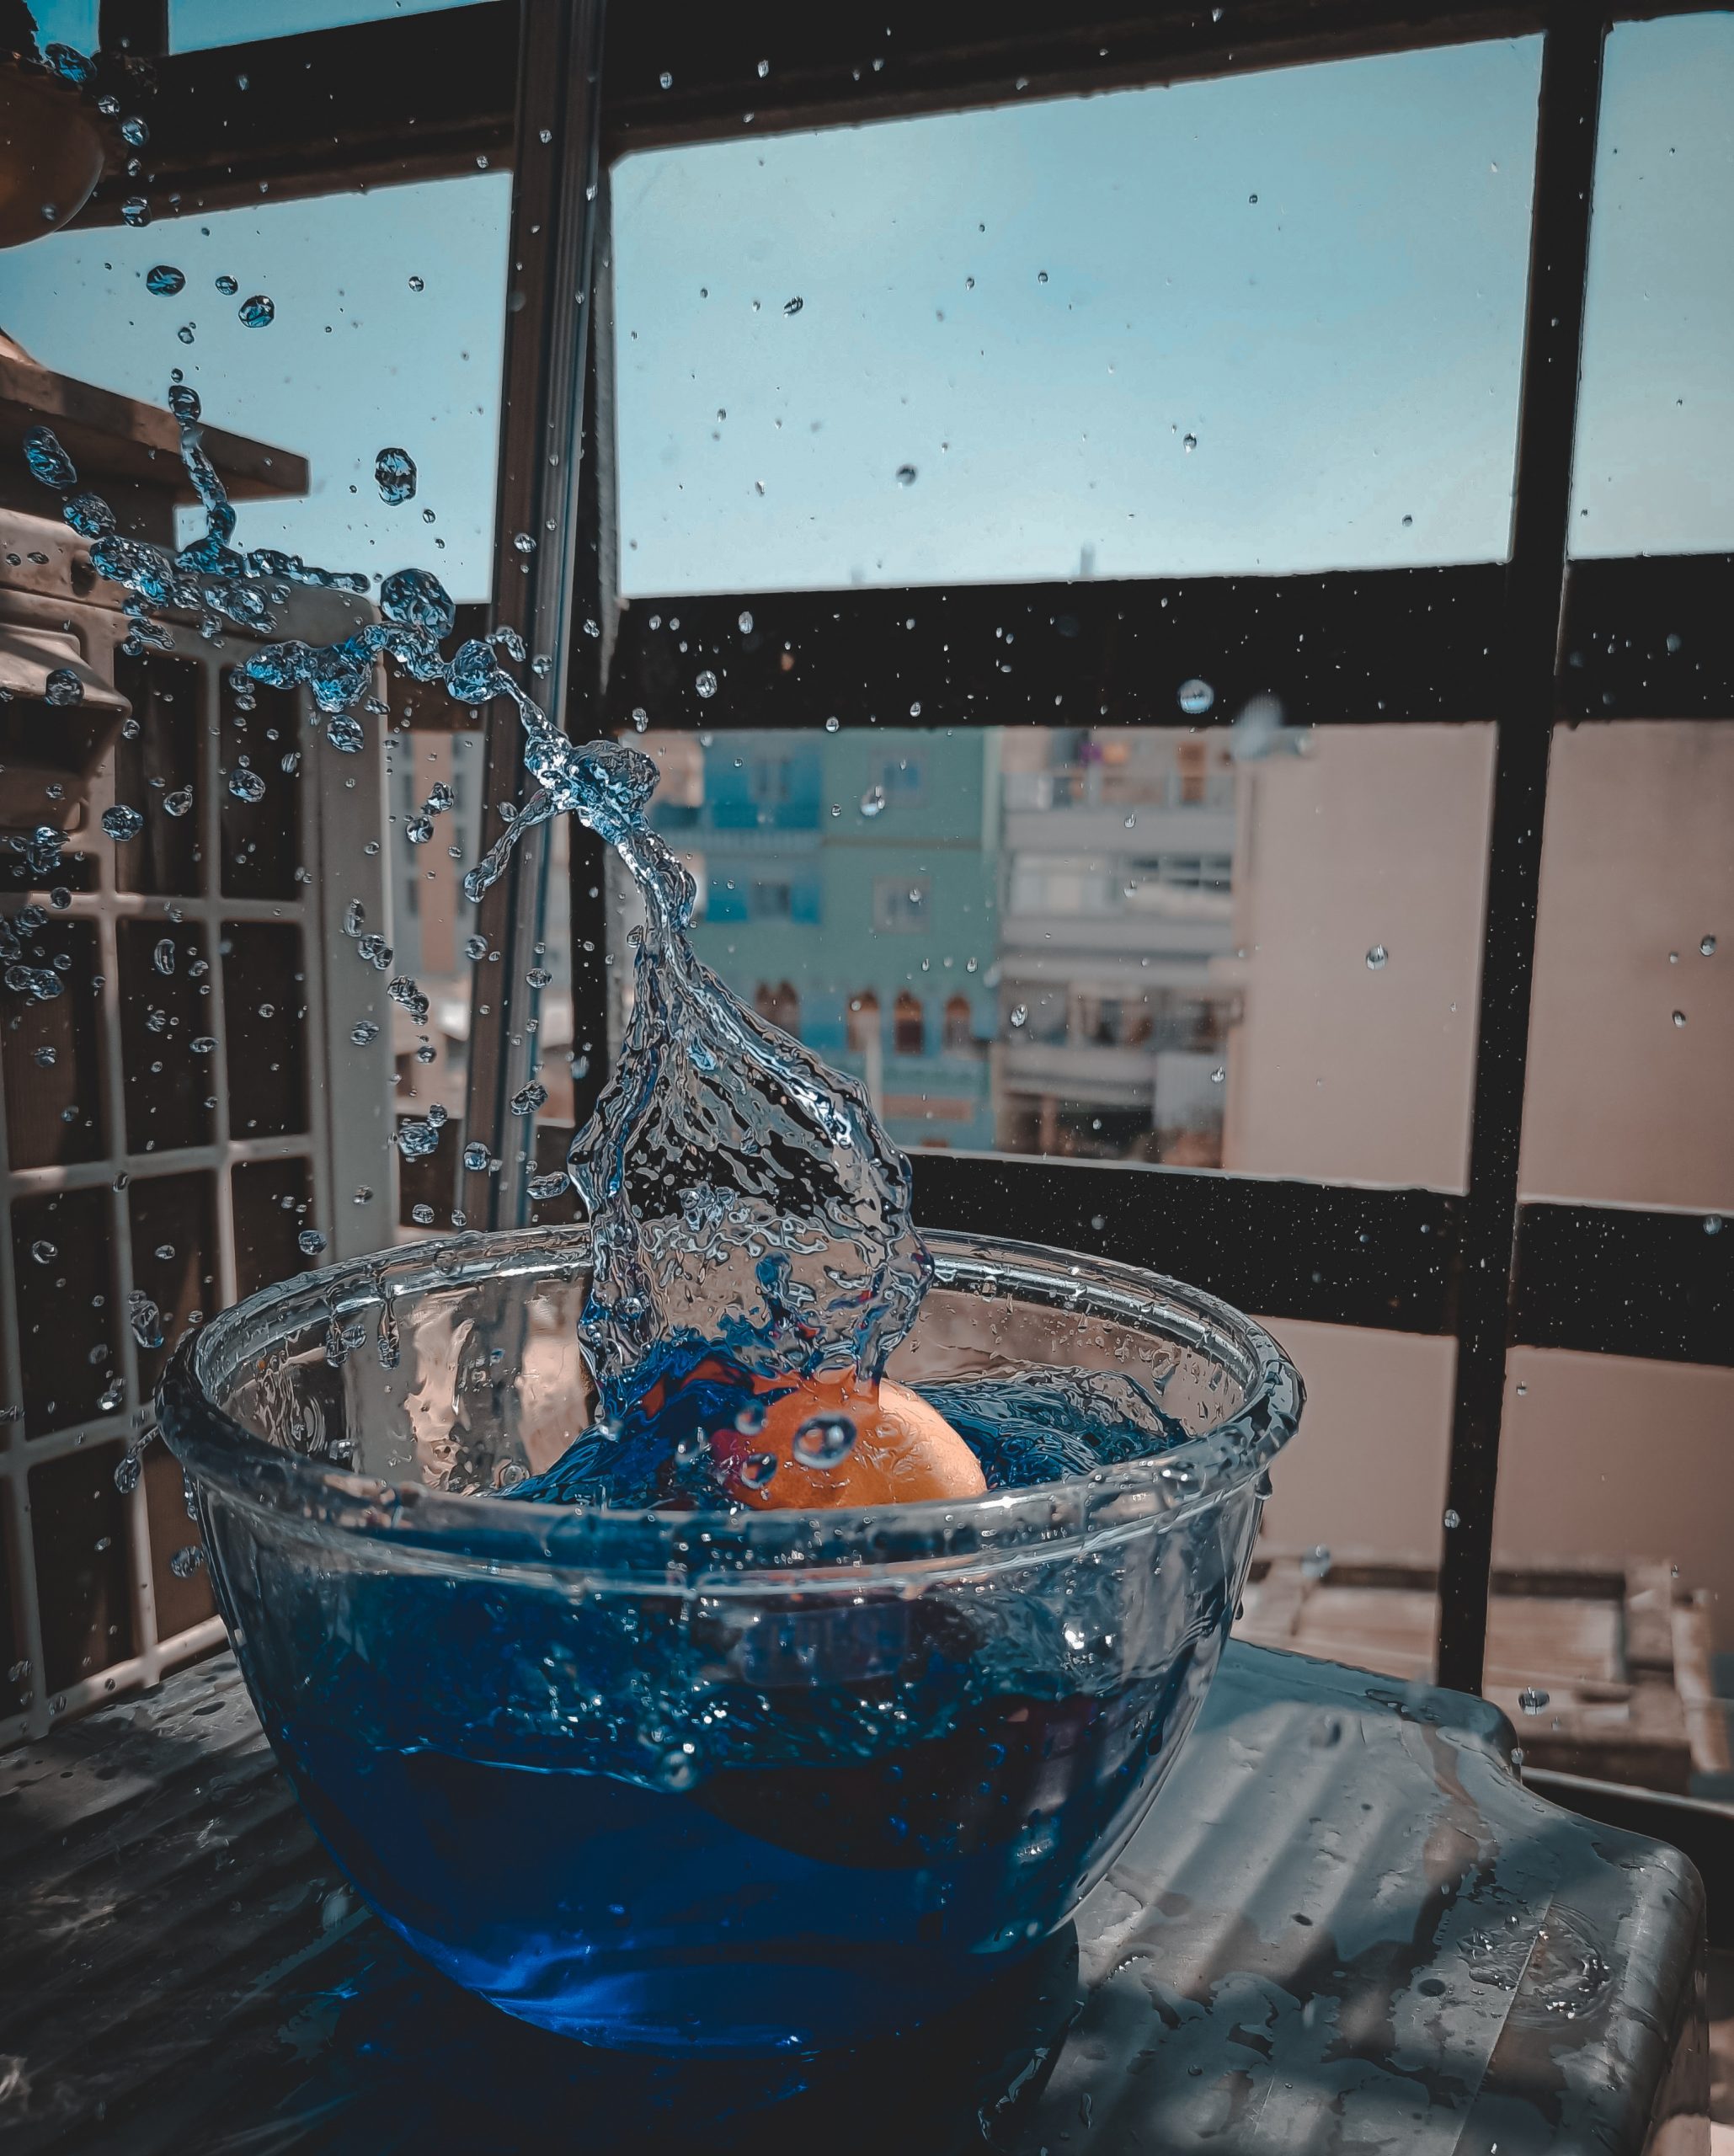 ball dropping in a bowl of blue colored water